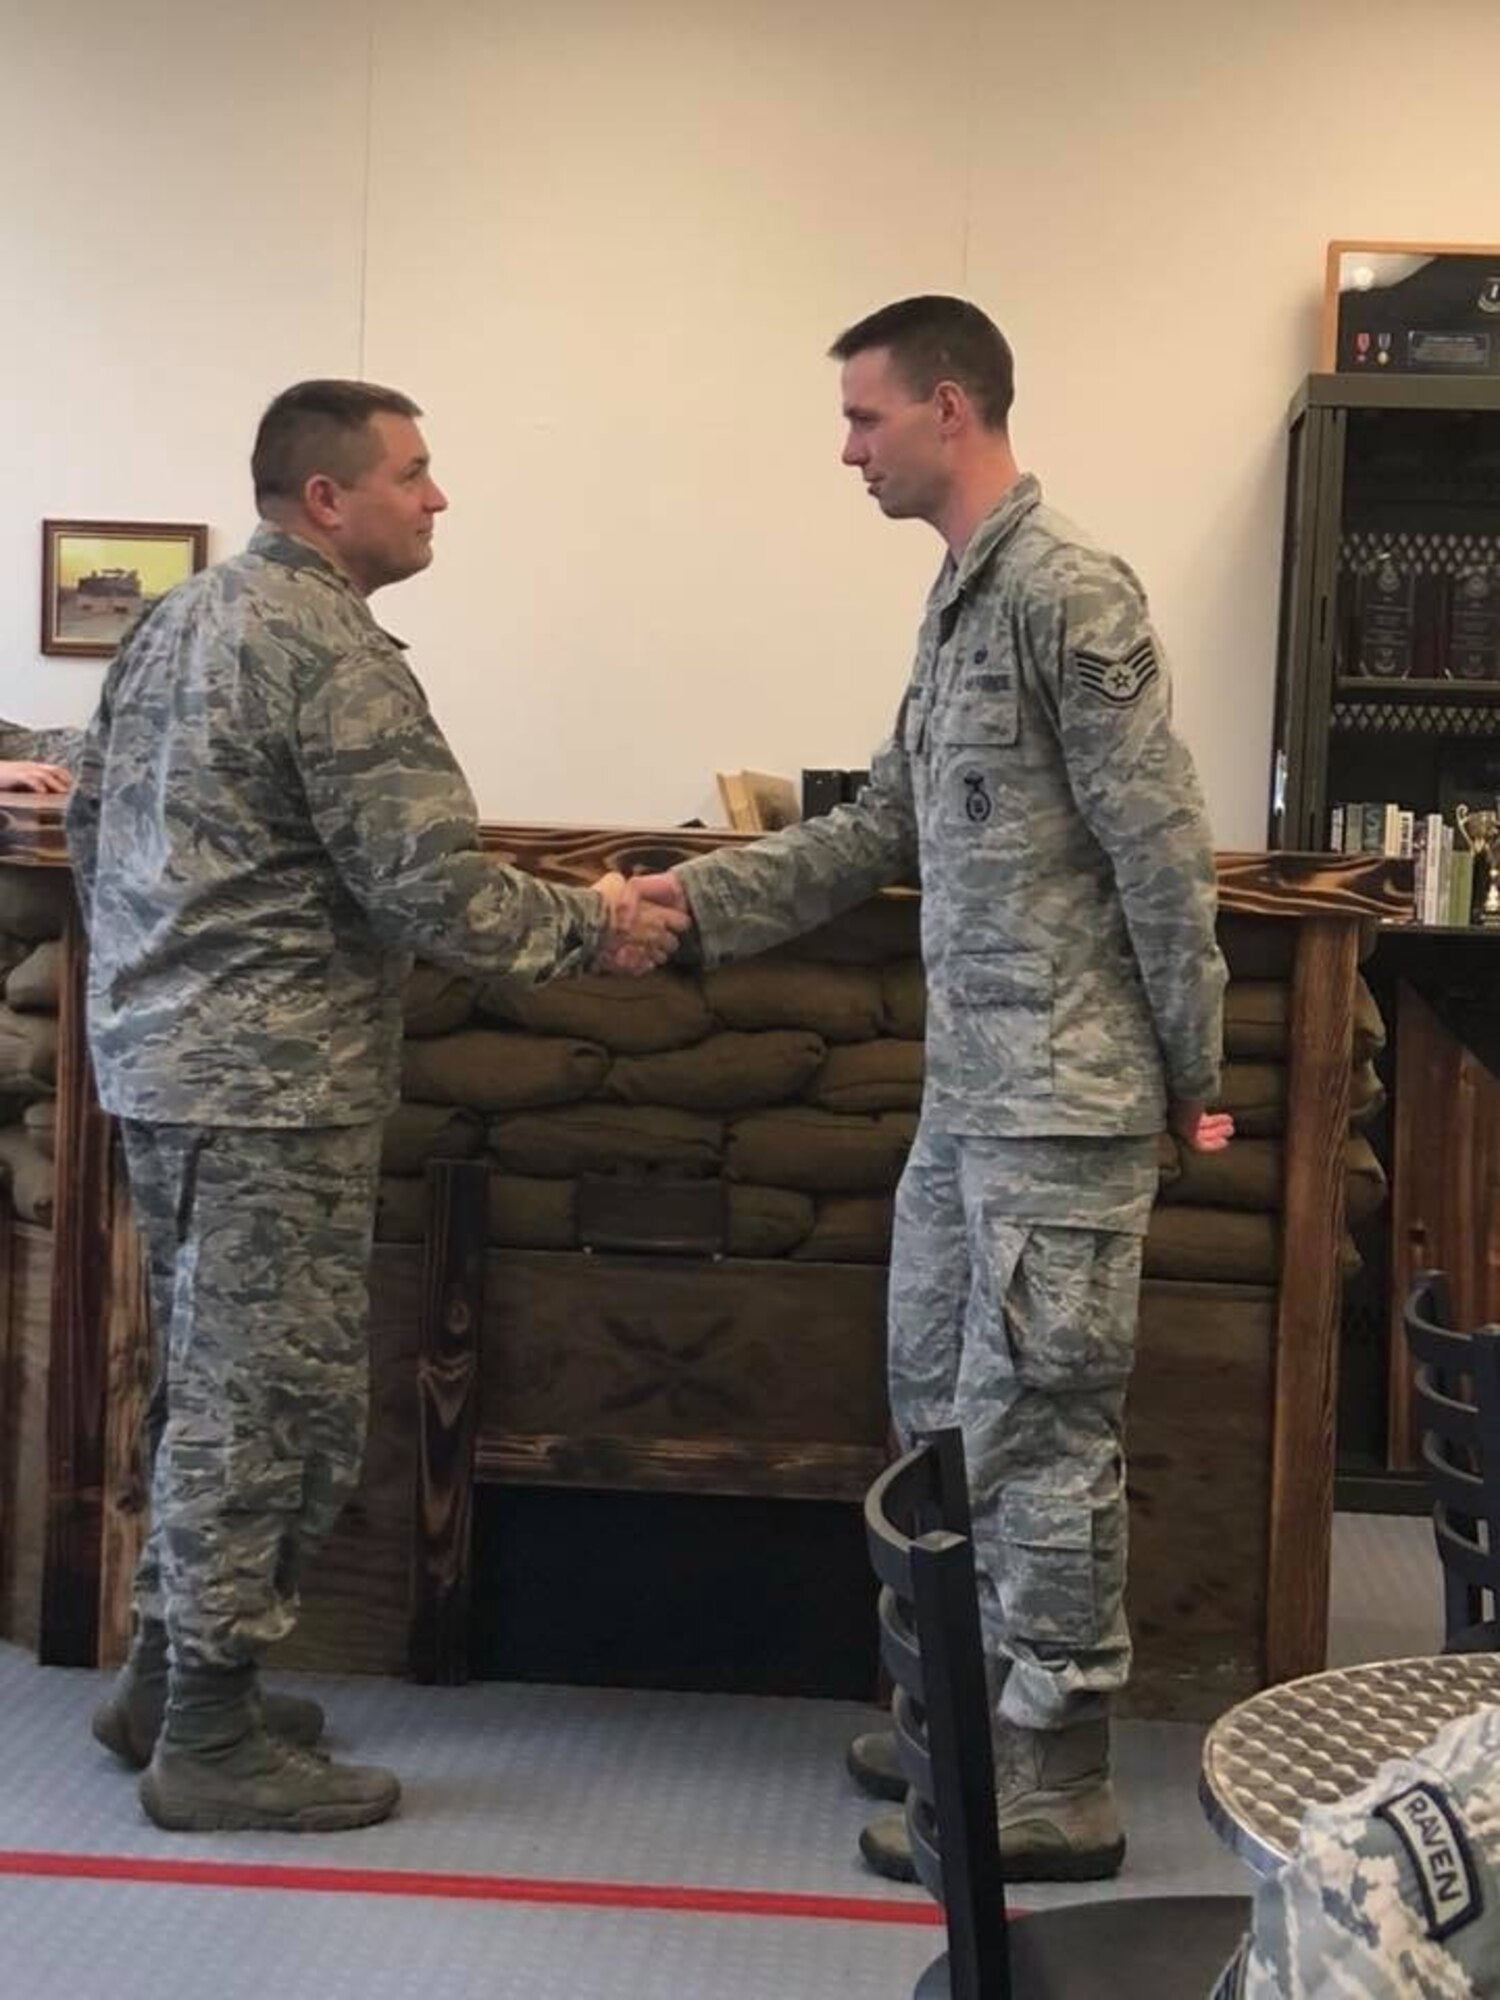 Maj. Michael Holt, 627th Security Forces Squadron commander, presents a coin to Staff Sgt. Daniel Watkins, 627th SFS unit training manager, for outstanding Airmanship, Jan. 12, 2018 at Joint Base Lewis-McChord, Wash. Watkins went above and beyond the call of duty to assist a retired Marine Corps lieutenant colonel, escorting him to an out-of-state Veterans Affairs appointment, and ensuring the gentleman’s continued care. (Courtesy photo)